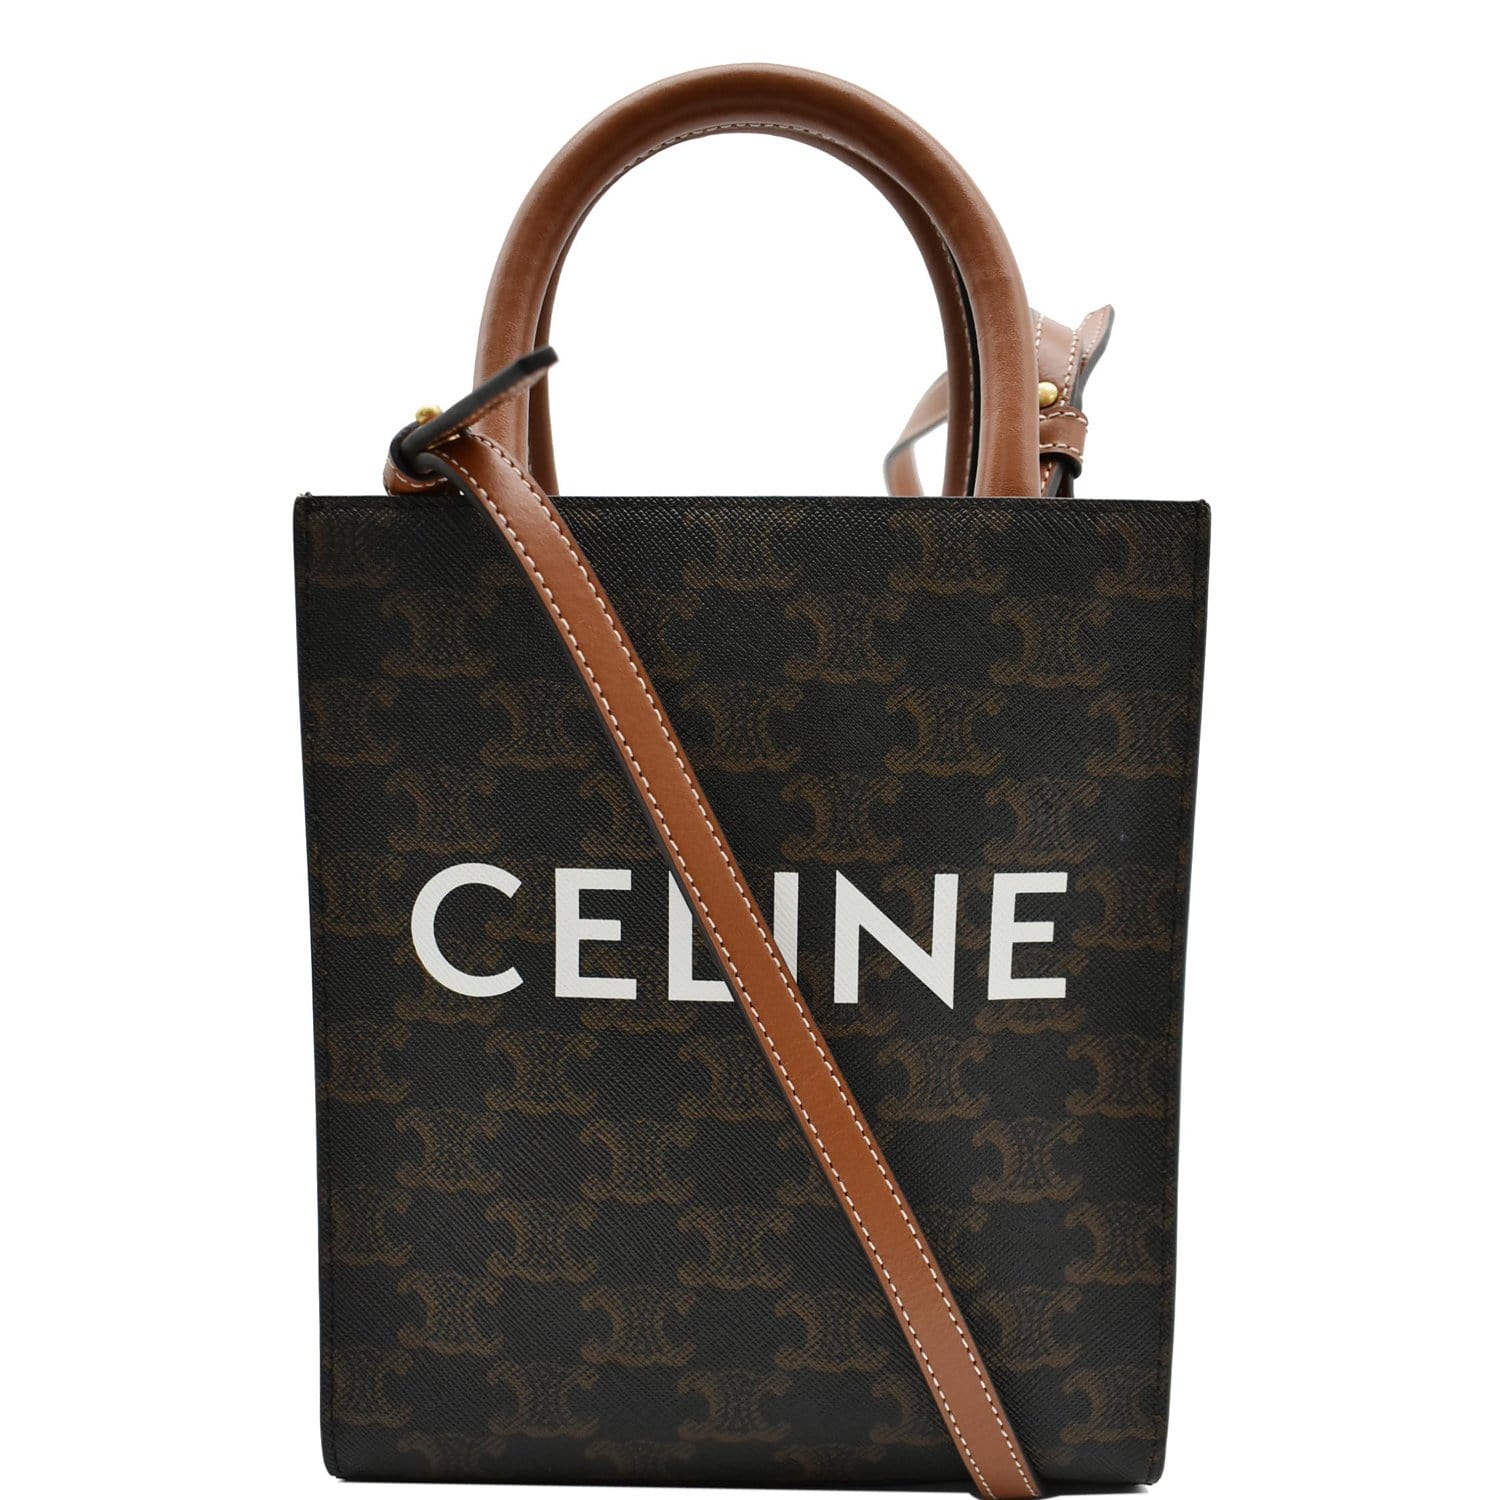 Celine Small Vertical Cabas Tote Bag with sling / crossbody